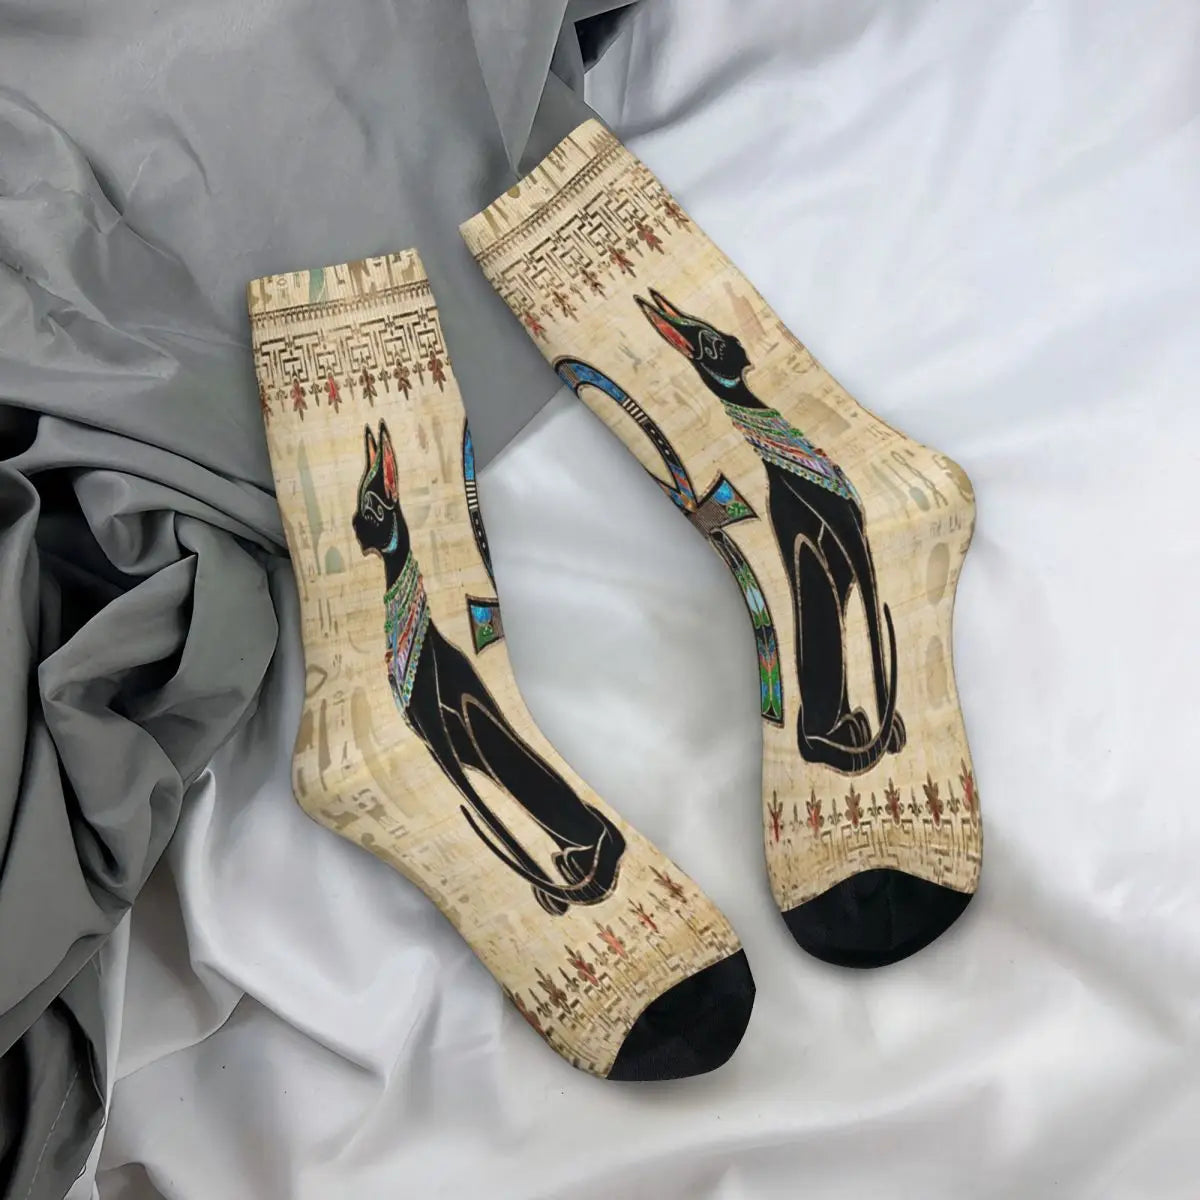 Cats And Ankh Cross Ancient Egypt Egyptian Socks Male Mens Women Spring Stockings Hip Hop